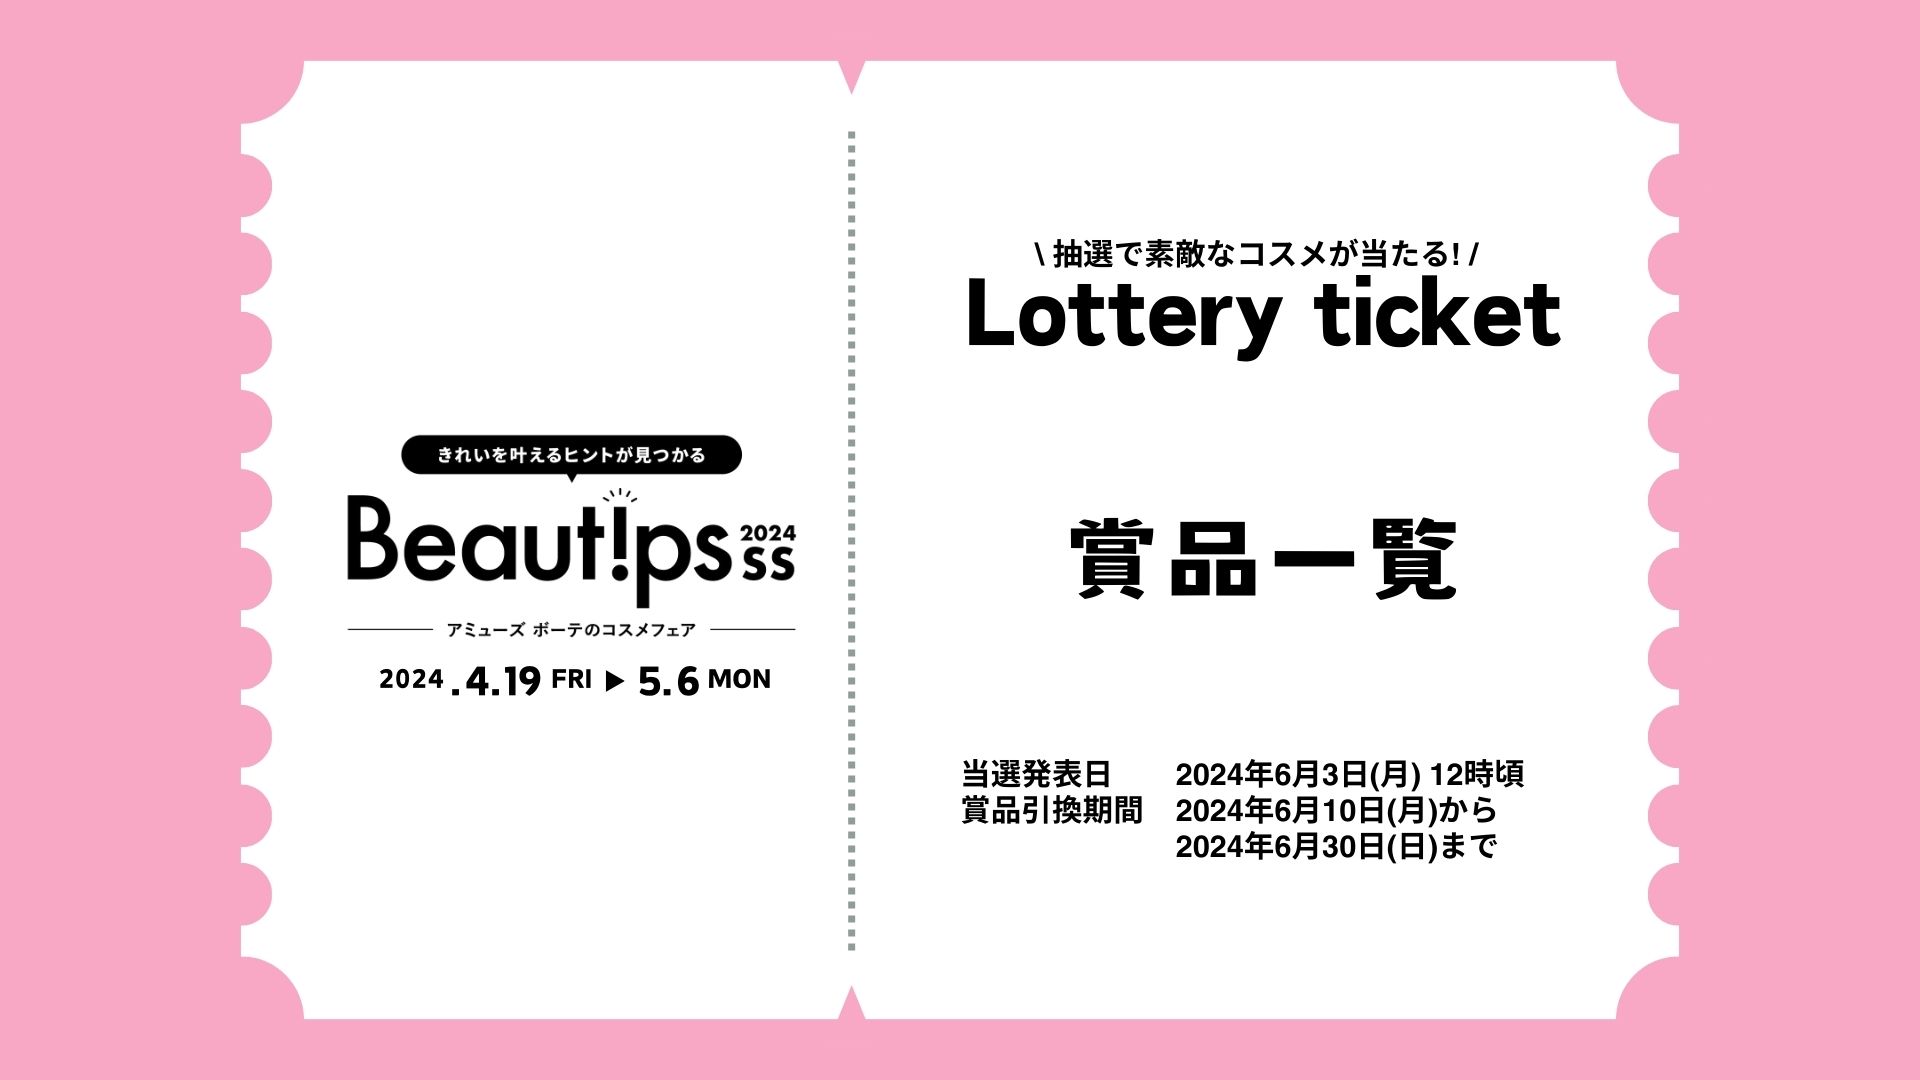 【Beautips】Lottery ticket campaign 賞品一覧